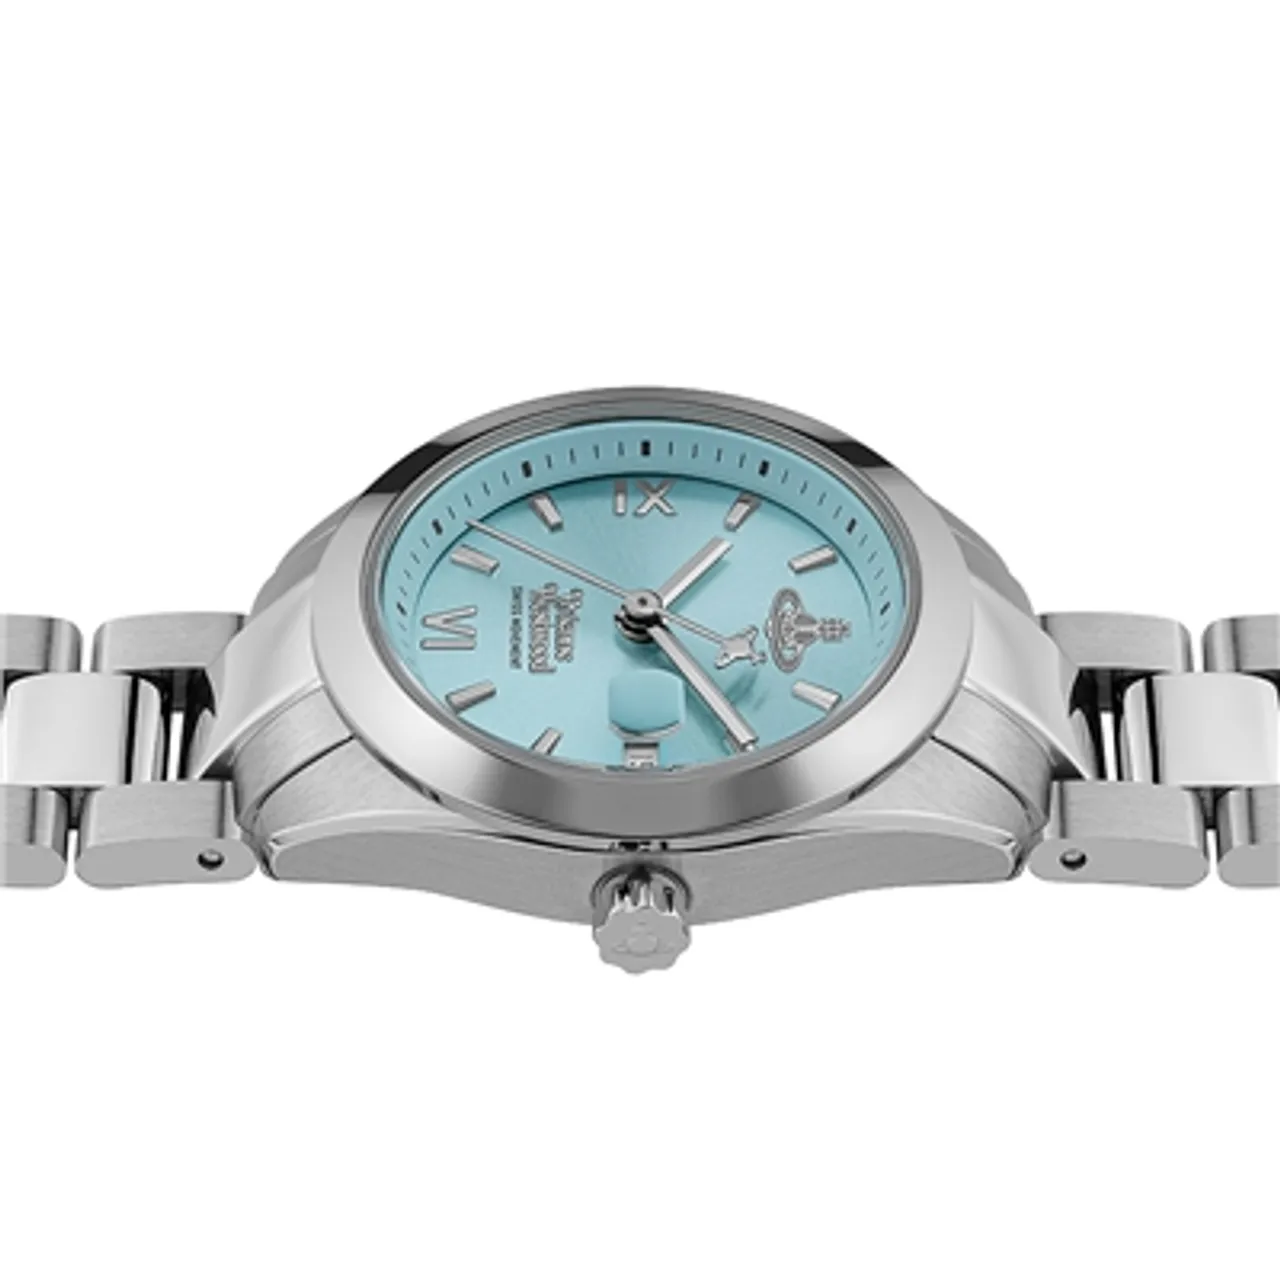 Vivienne Westwood Silver and Turquoise Fenchurch Watch - Silver